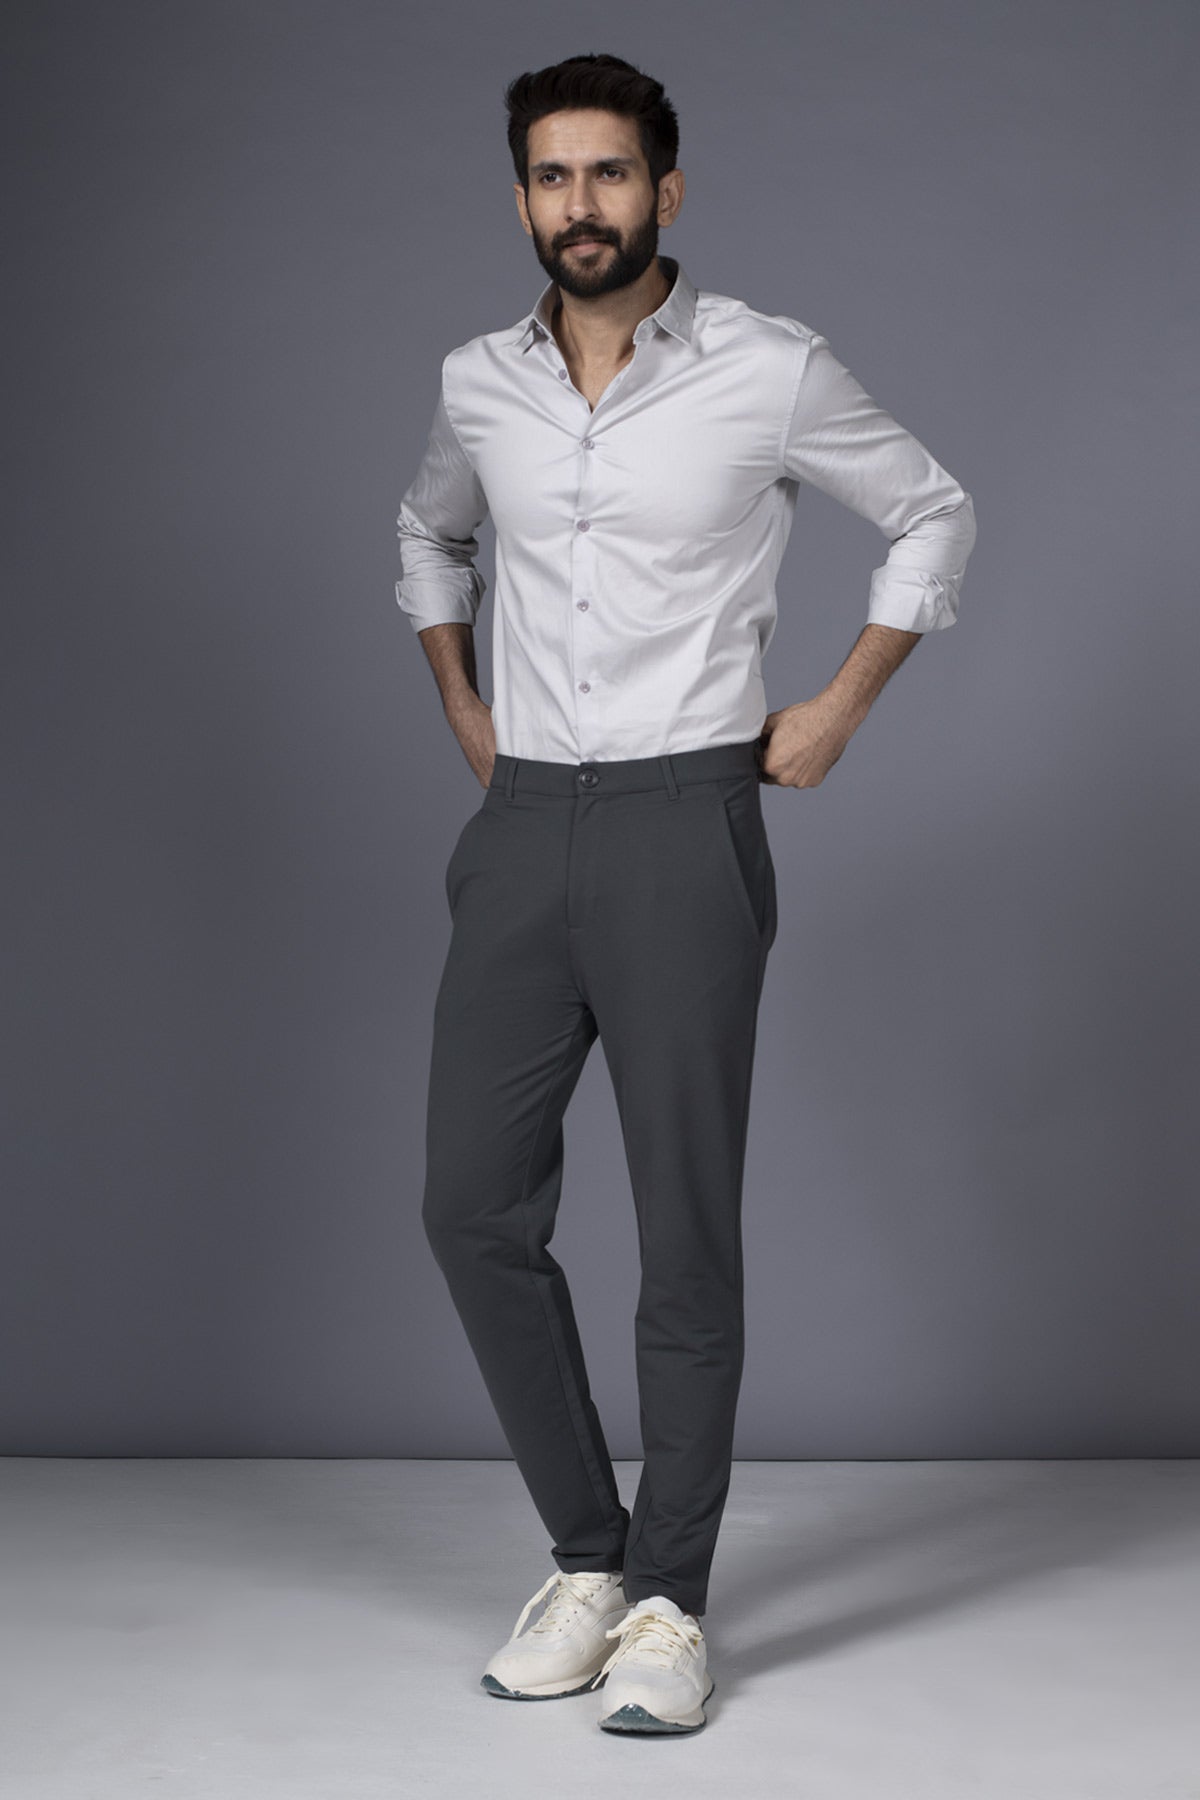 Buy Formal Pants For Men At Lowest Prices Online In India  Tata CLiQ